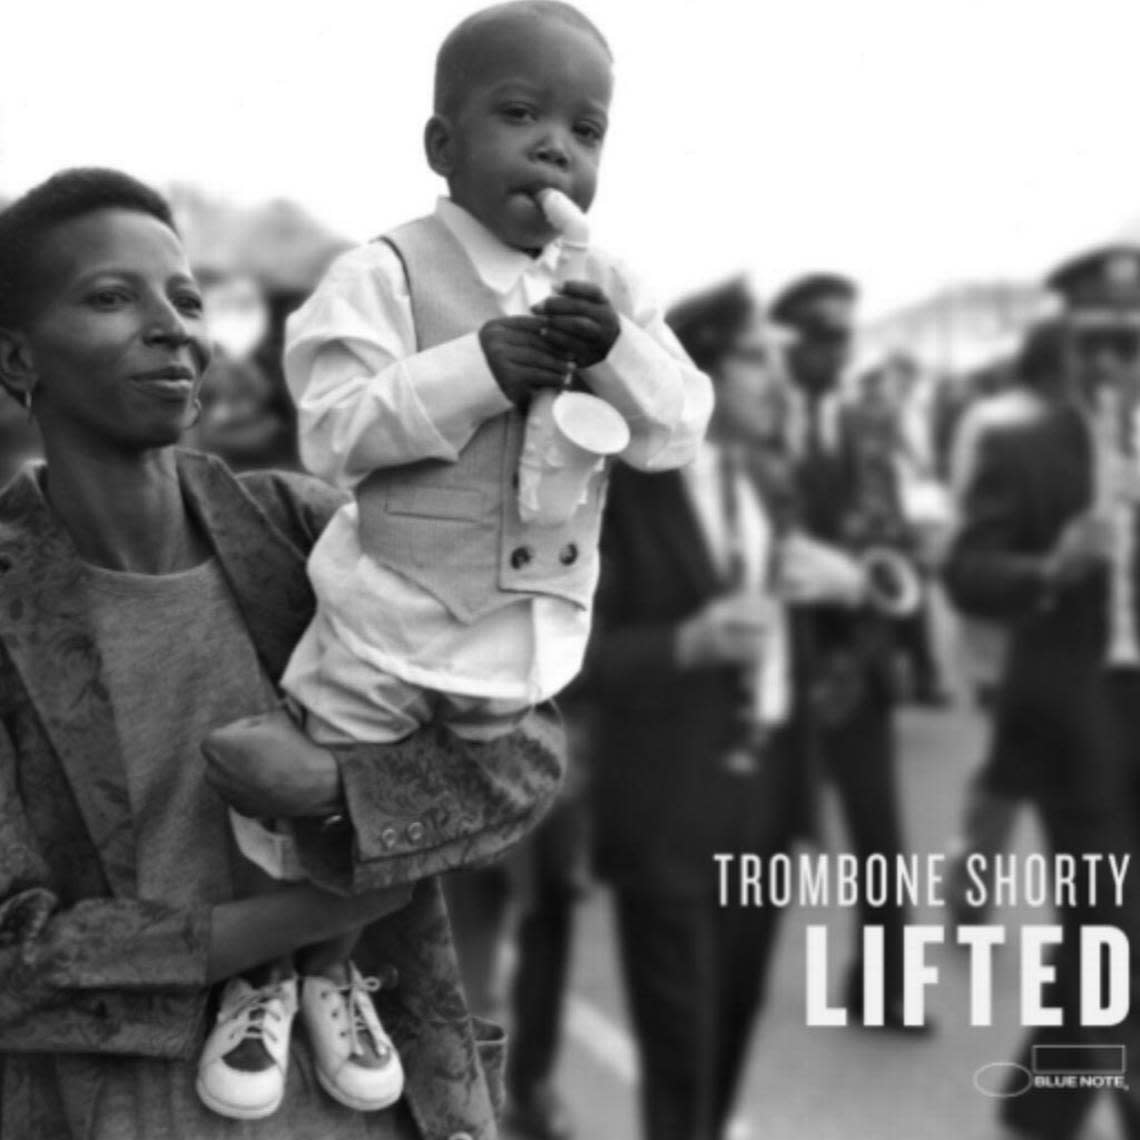 Trombone Shorty’s latest album, “Lifted,” features a photo of him as a boy being held up by his late mother.